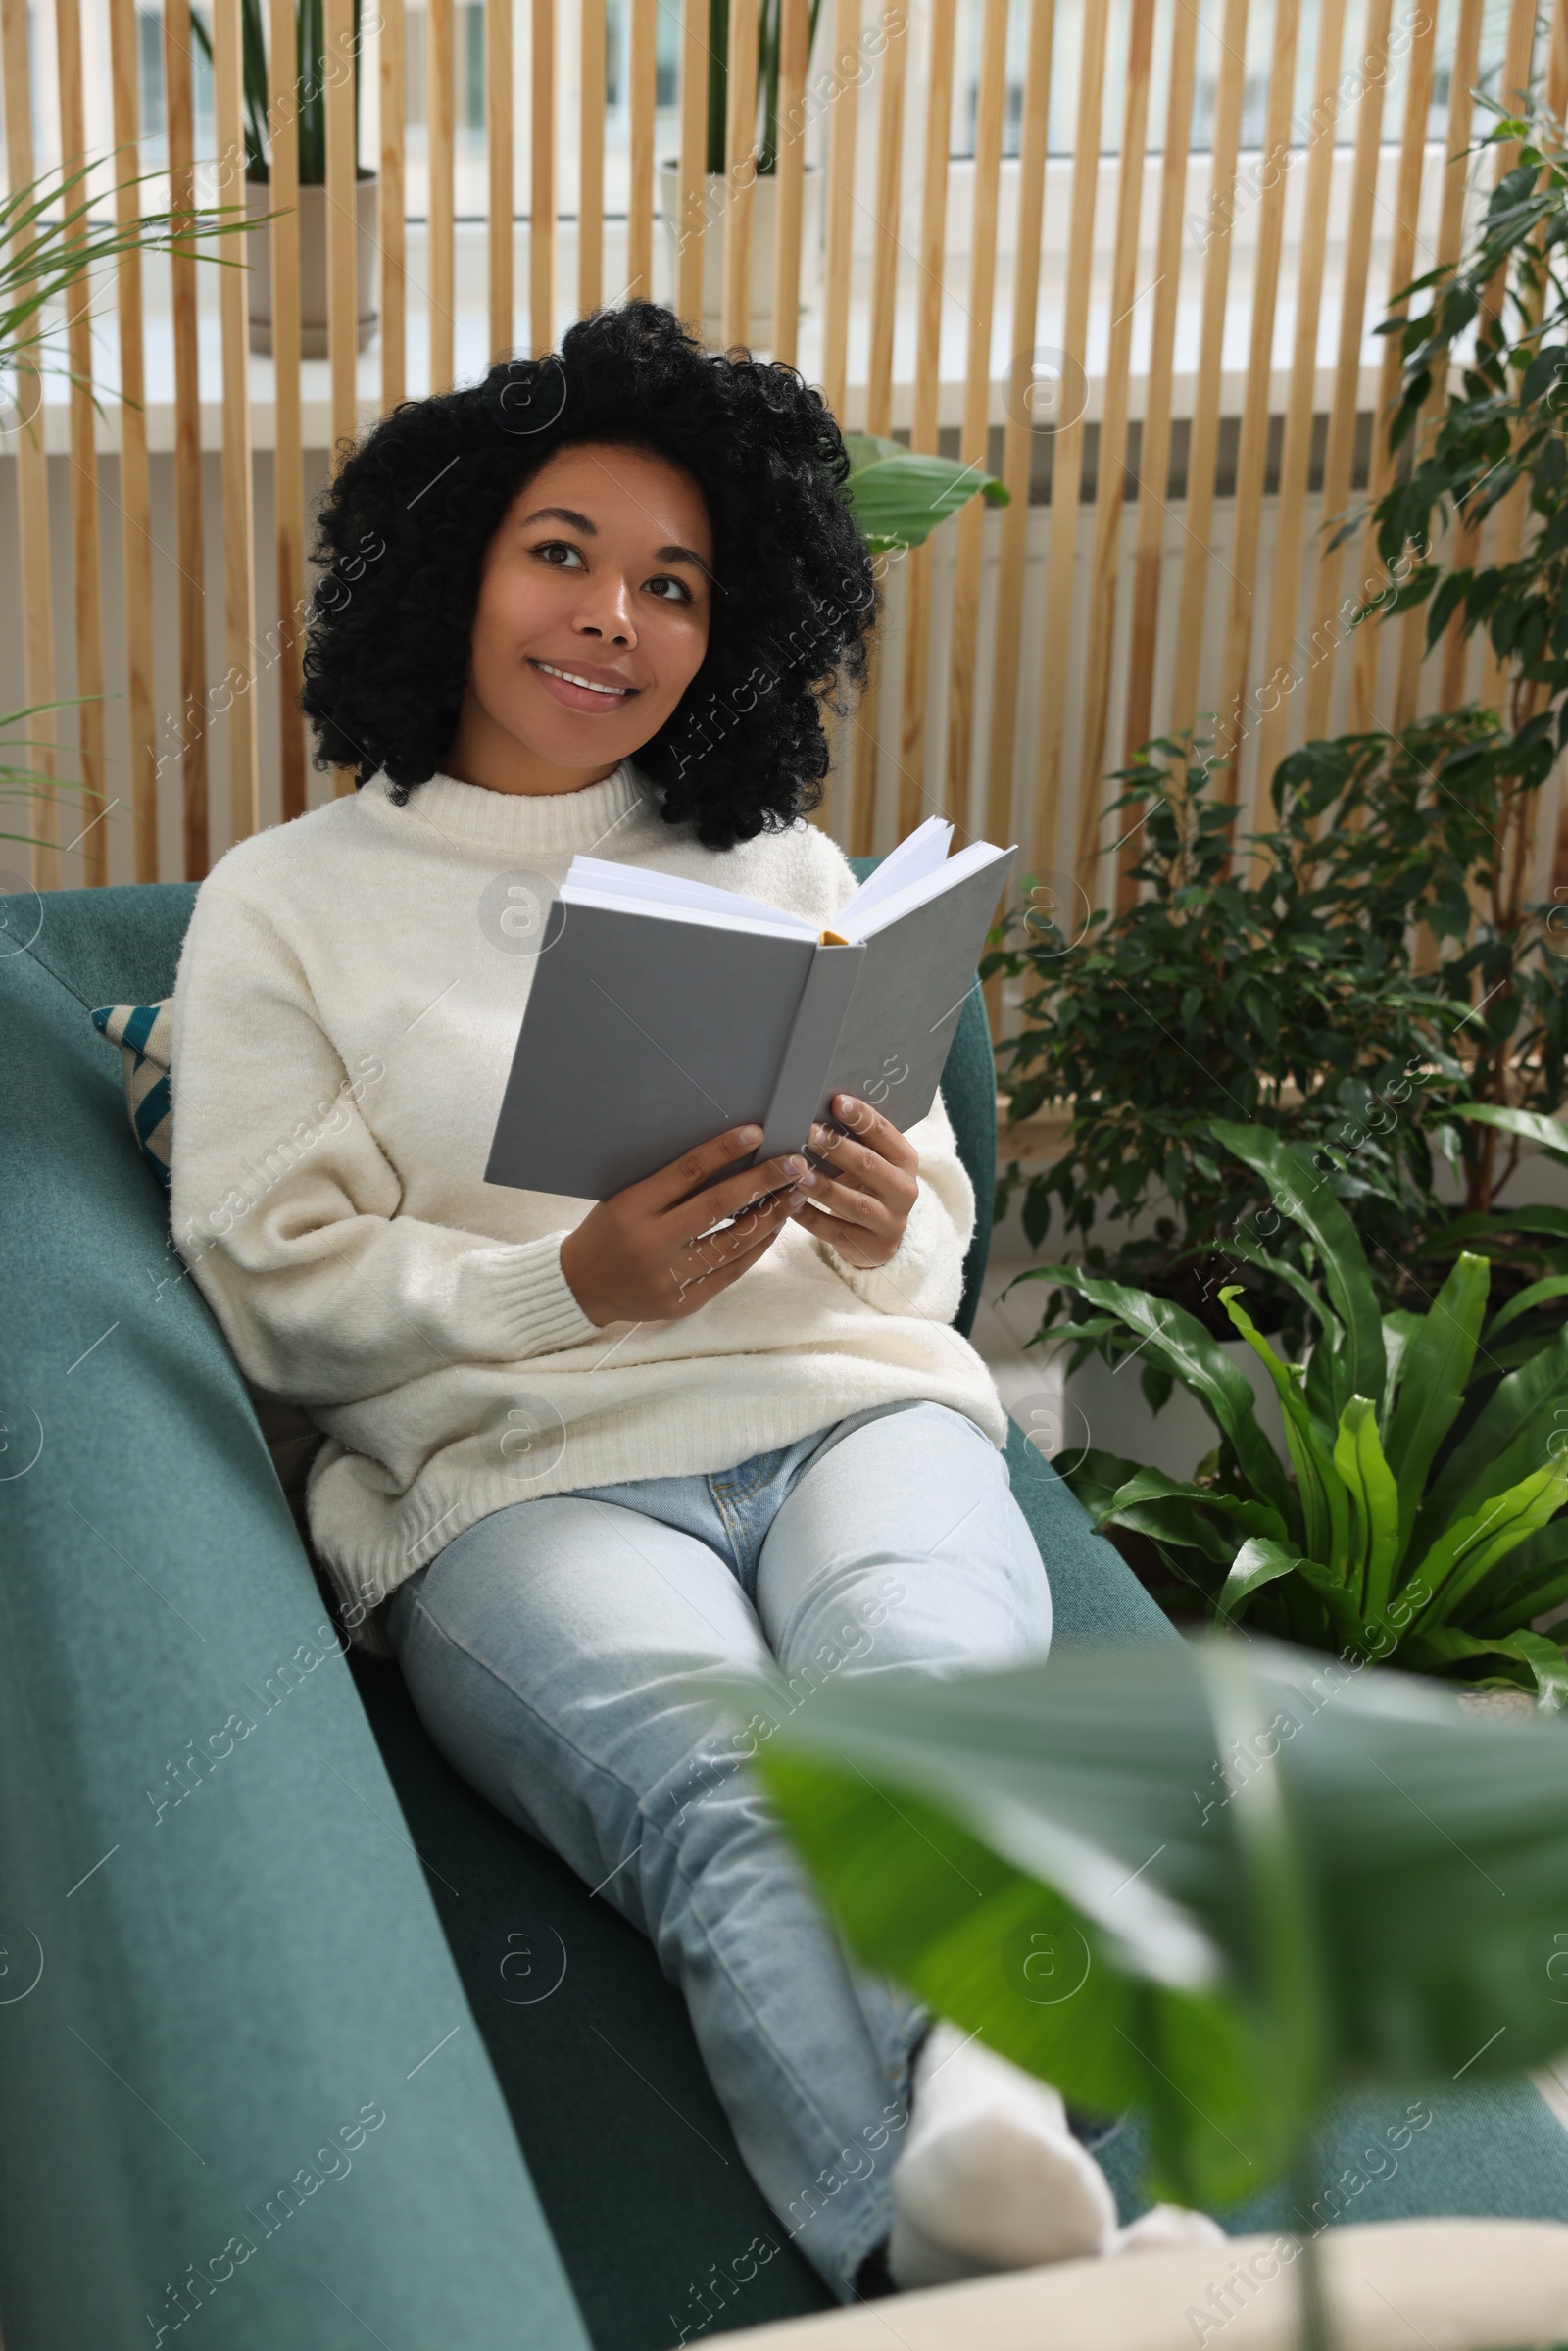 Photo of Relaxing atmosphere. Happy woman with book on sofa near beautiful houseplants in room